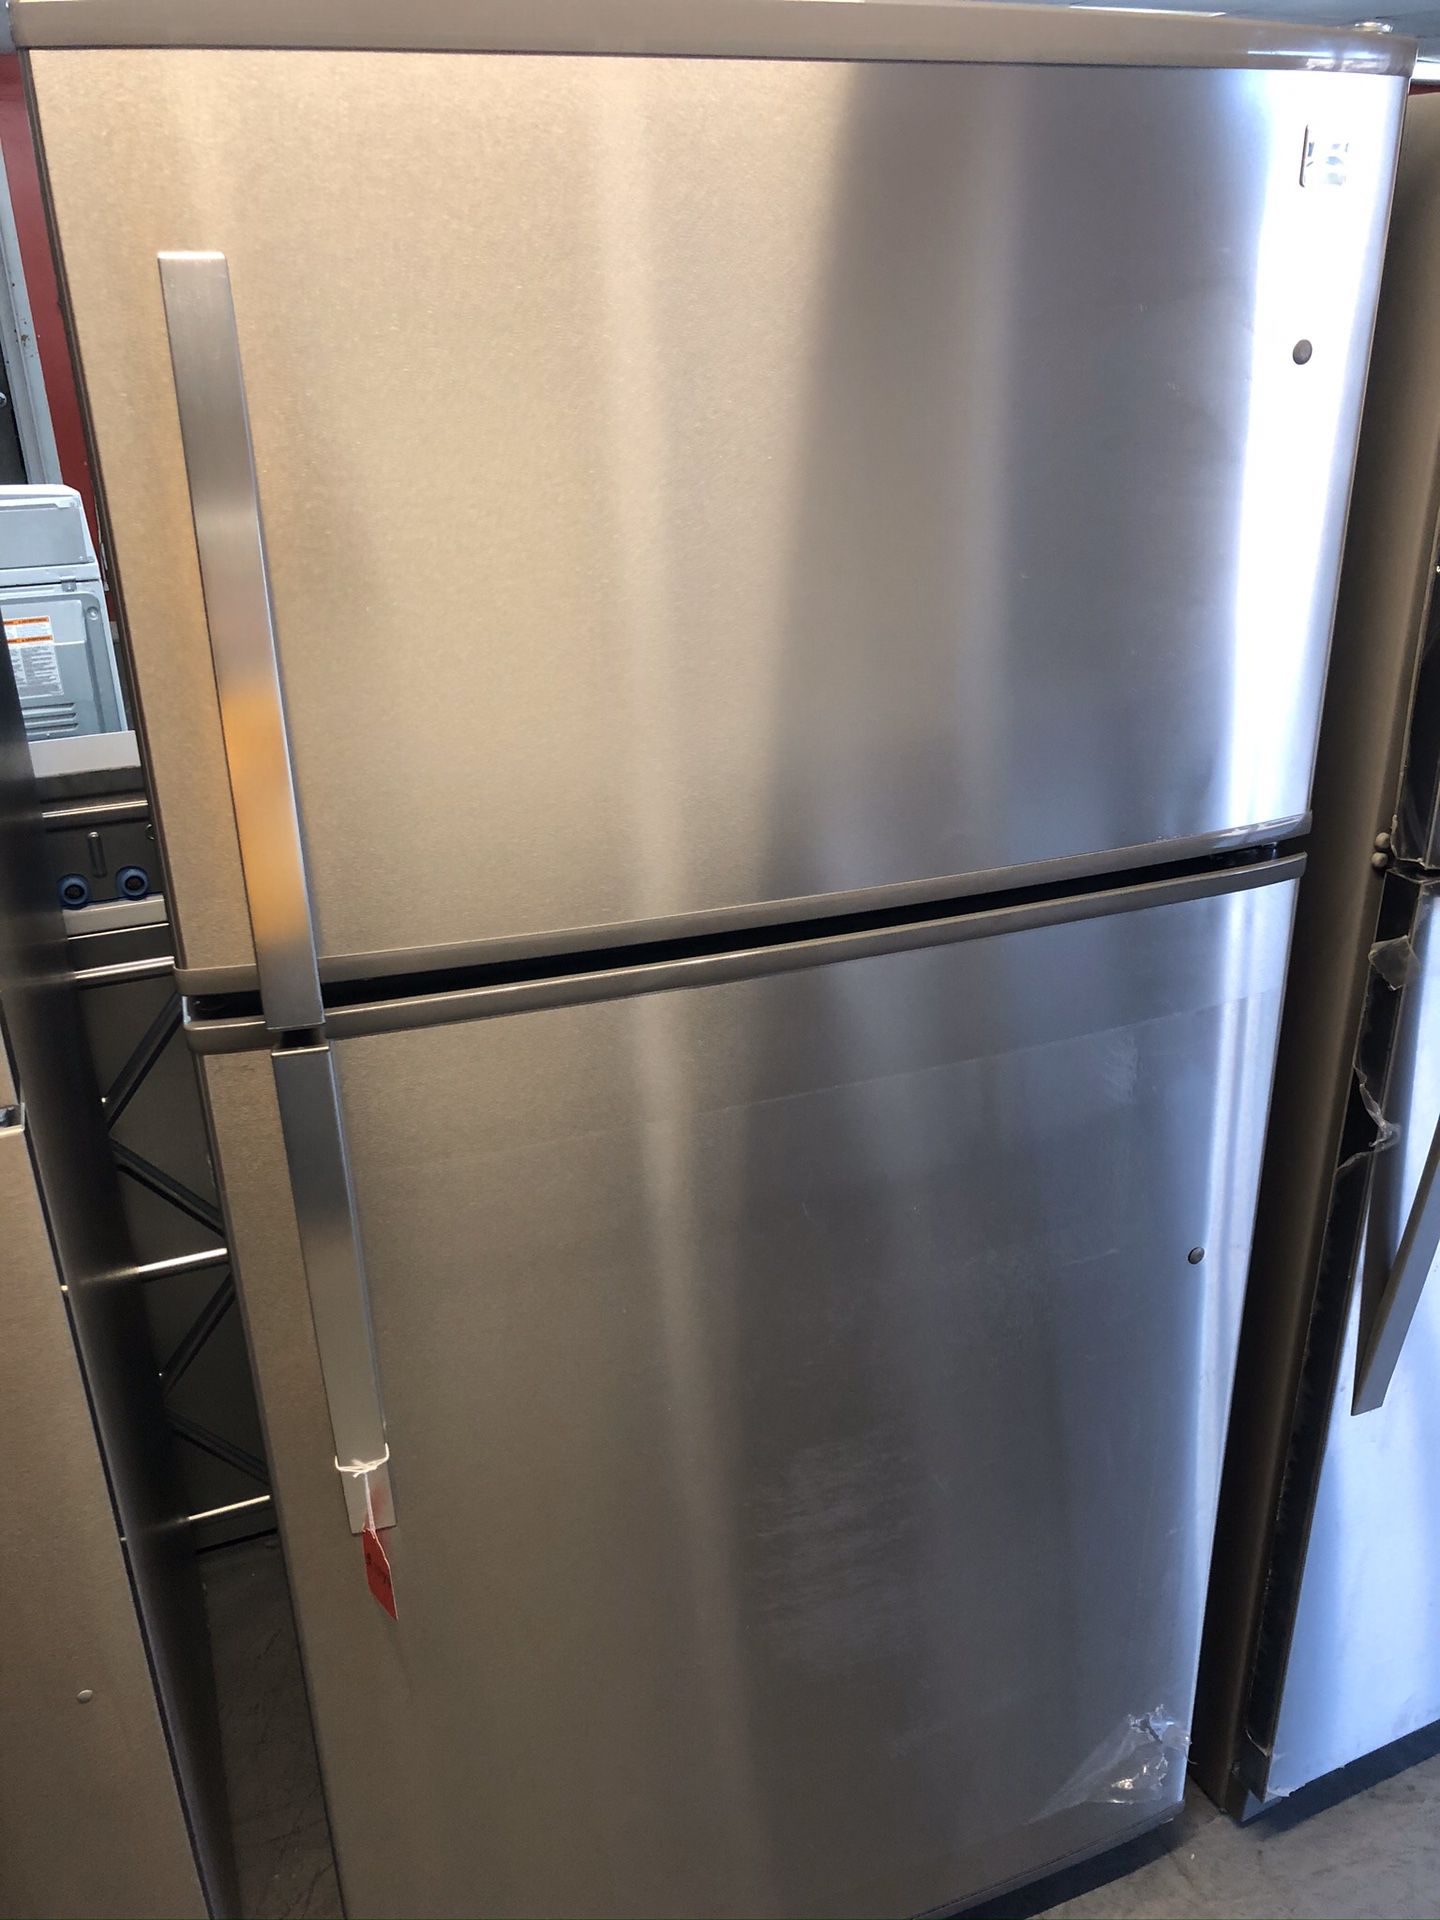 New scratch and dent kenmore 20 cu ft top and bottom fridge. 1 year warranty